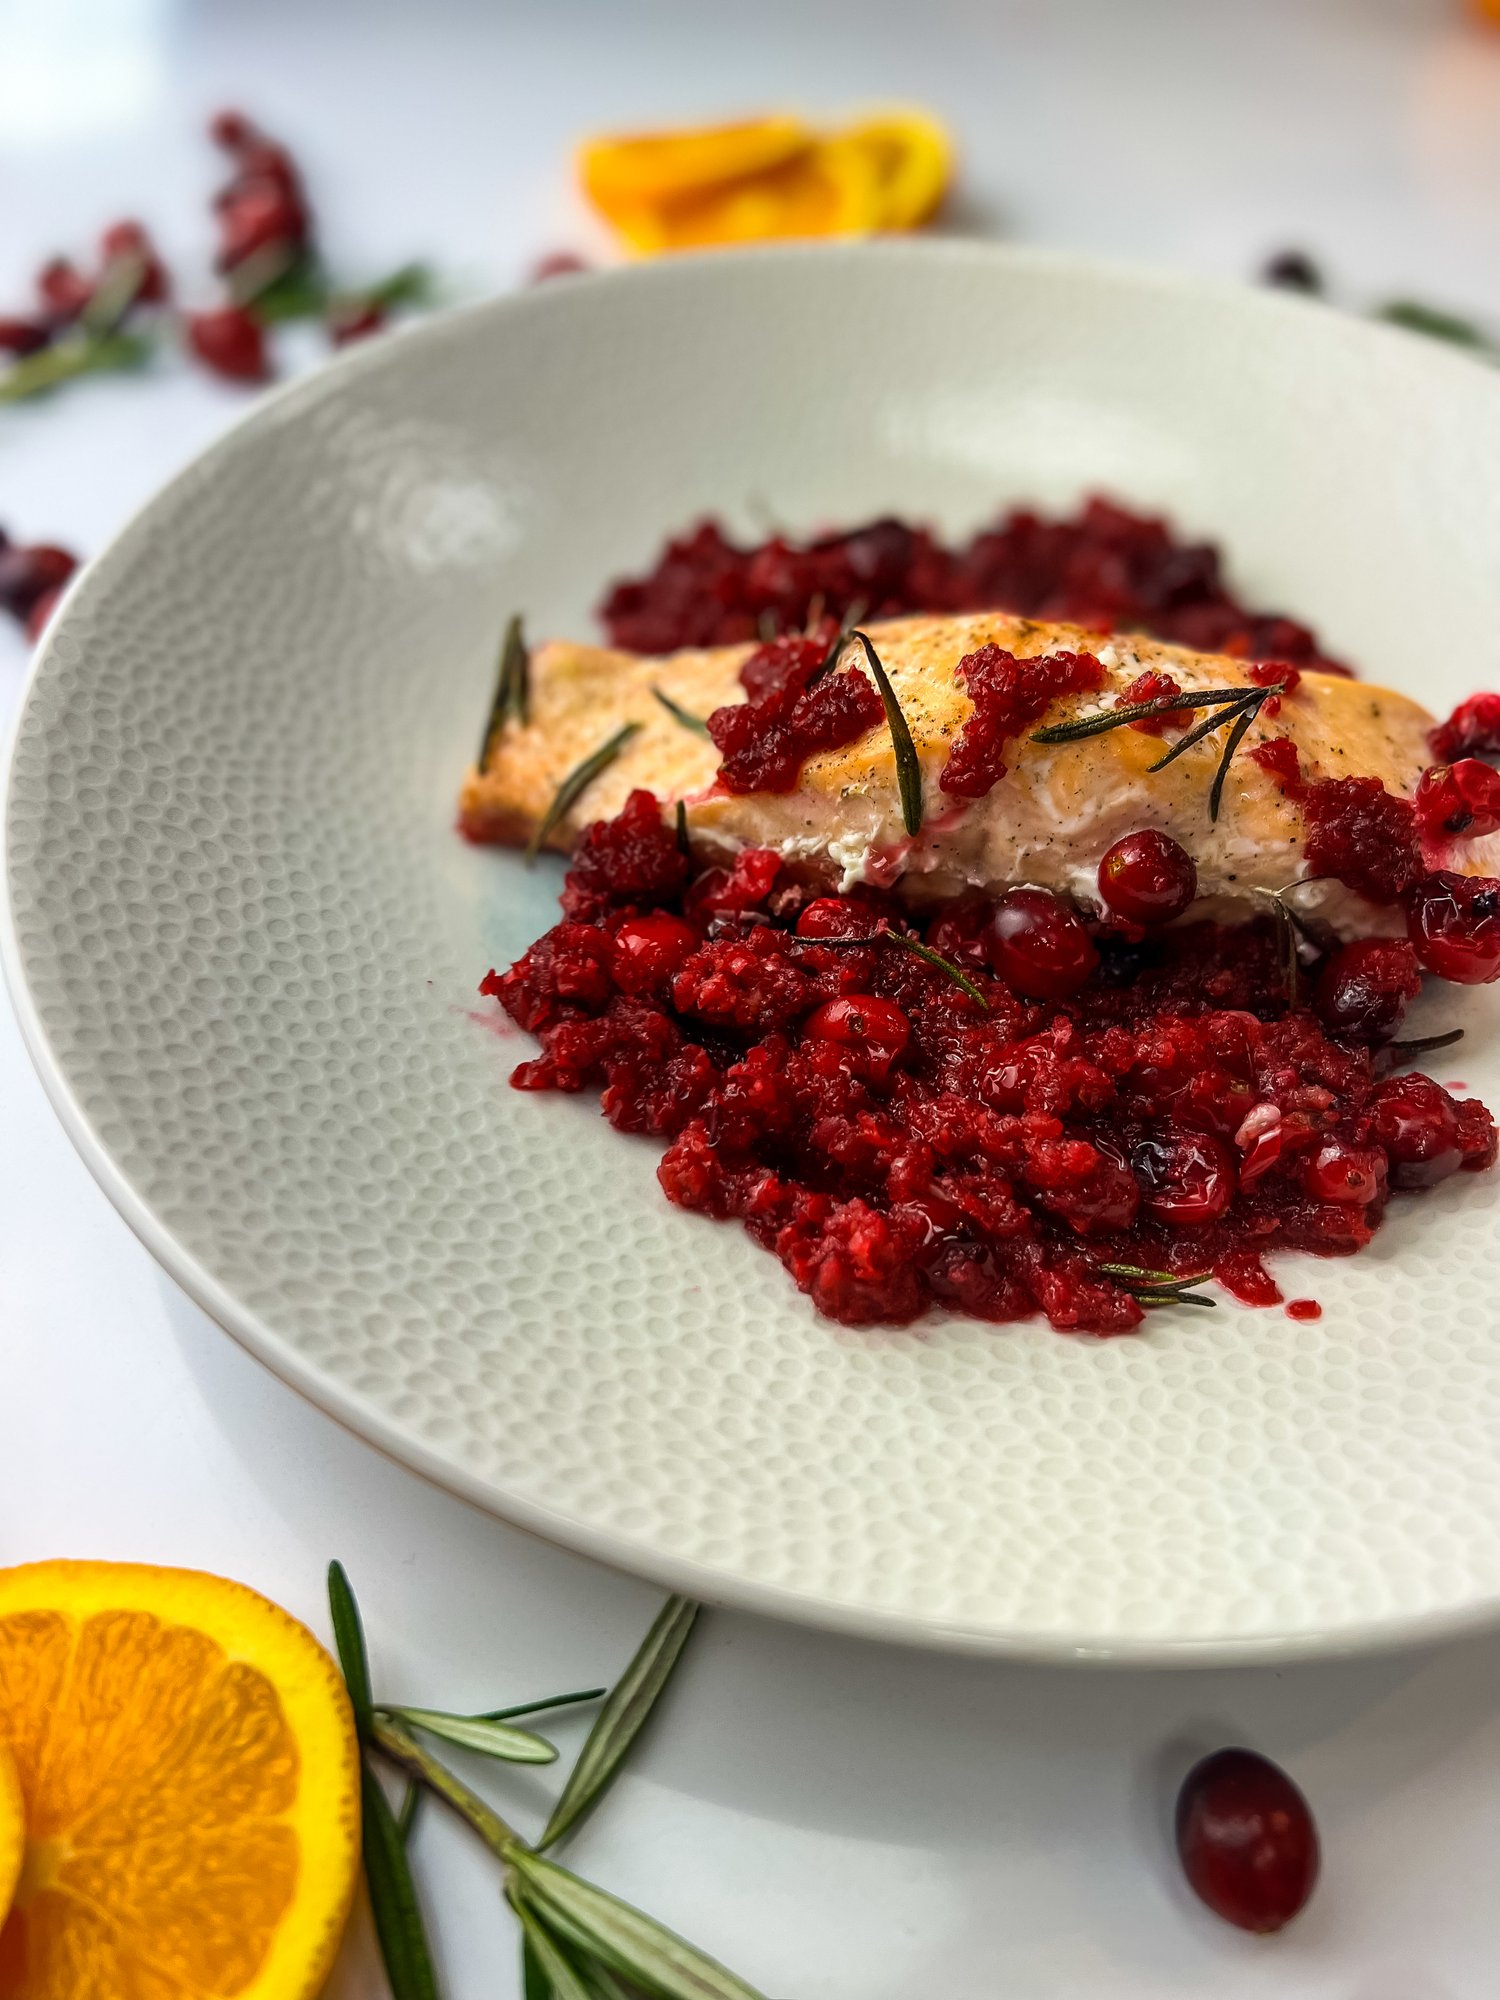 Roasted Cranberry Balsamic Salmon